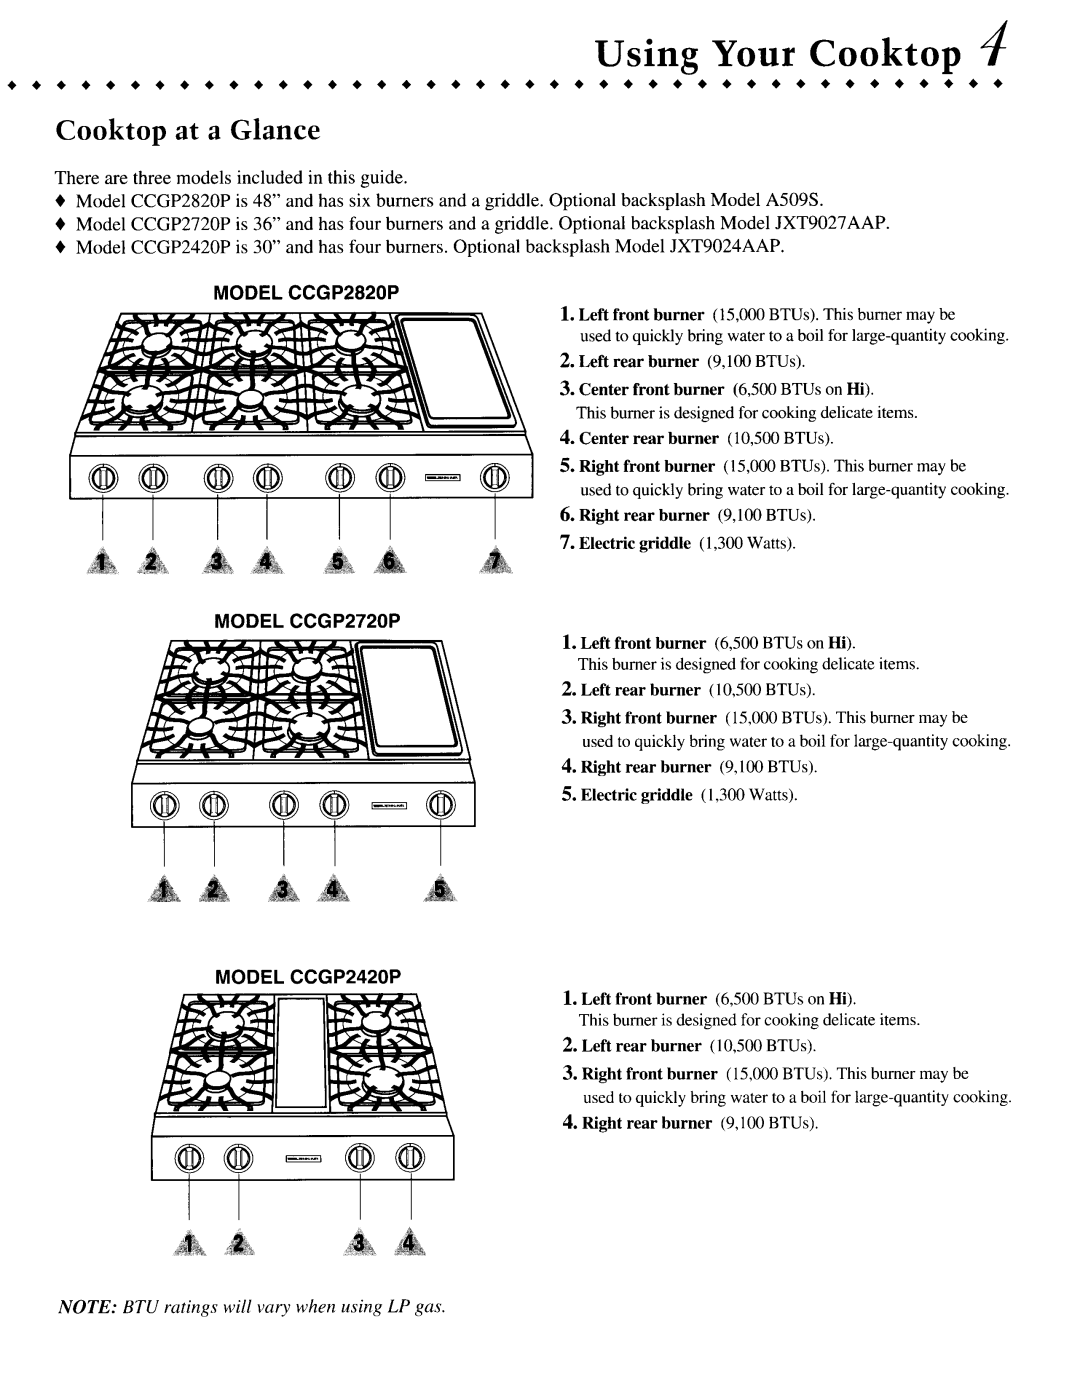 Jenn-Air manual Cooktop at a Glance, There are three models included in this guide, MODEL CCGP2820P, MODEL CCGP2720P 